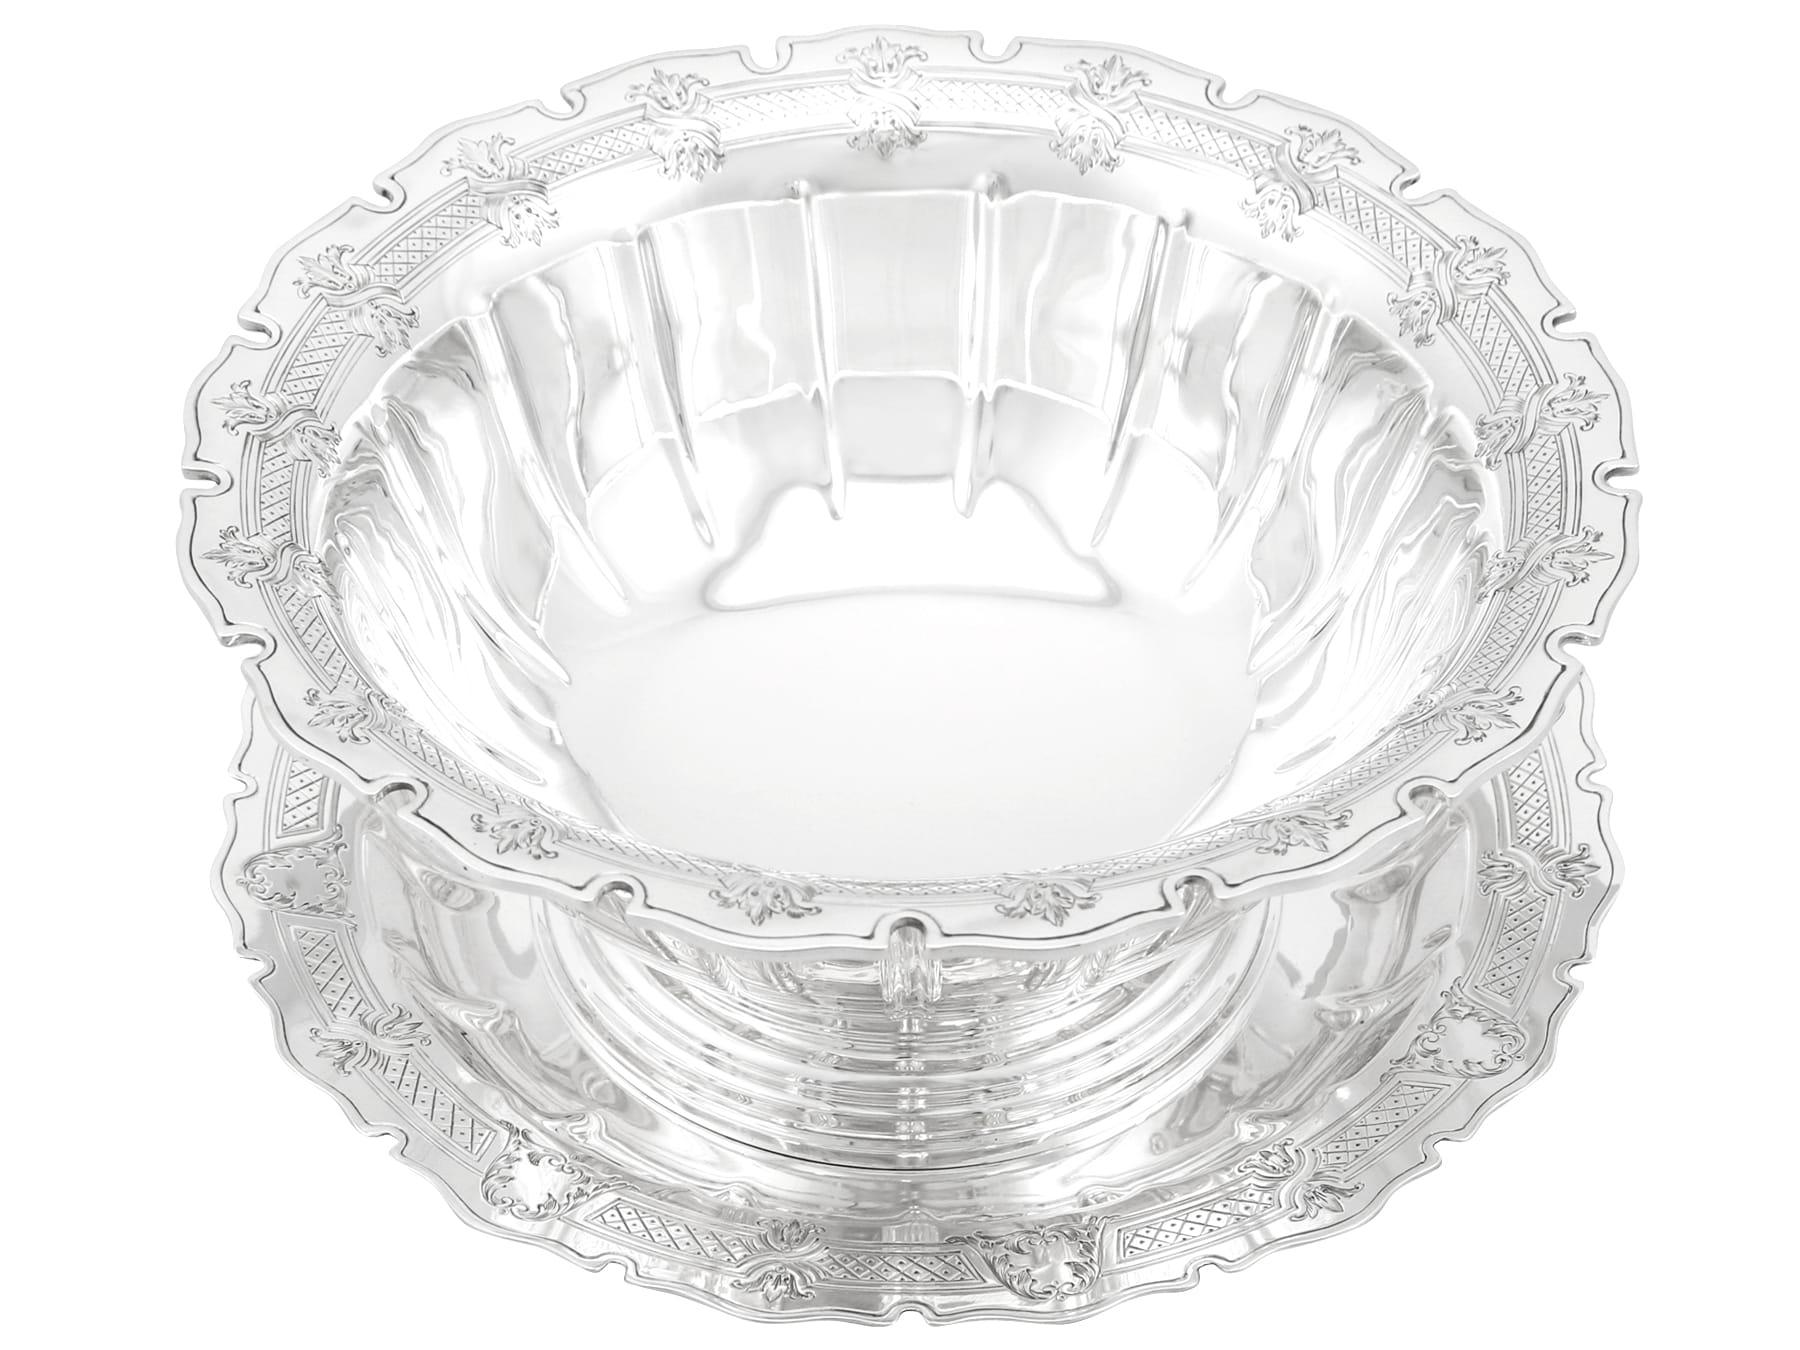 An exceptional, fine and impressive antique George V English sterling silver strawberry bowl and serving dish; an addition to our silver dining collection.

This exceptional antique George V sterling silver strawberry bowl and serving dish has a